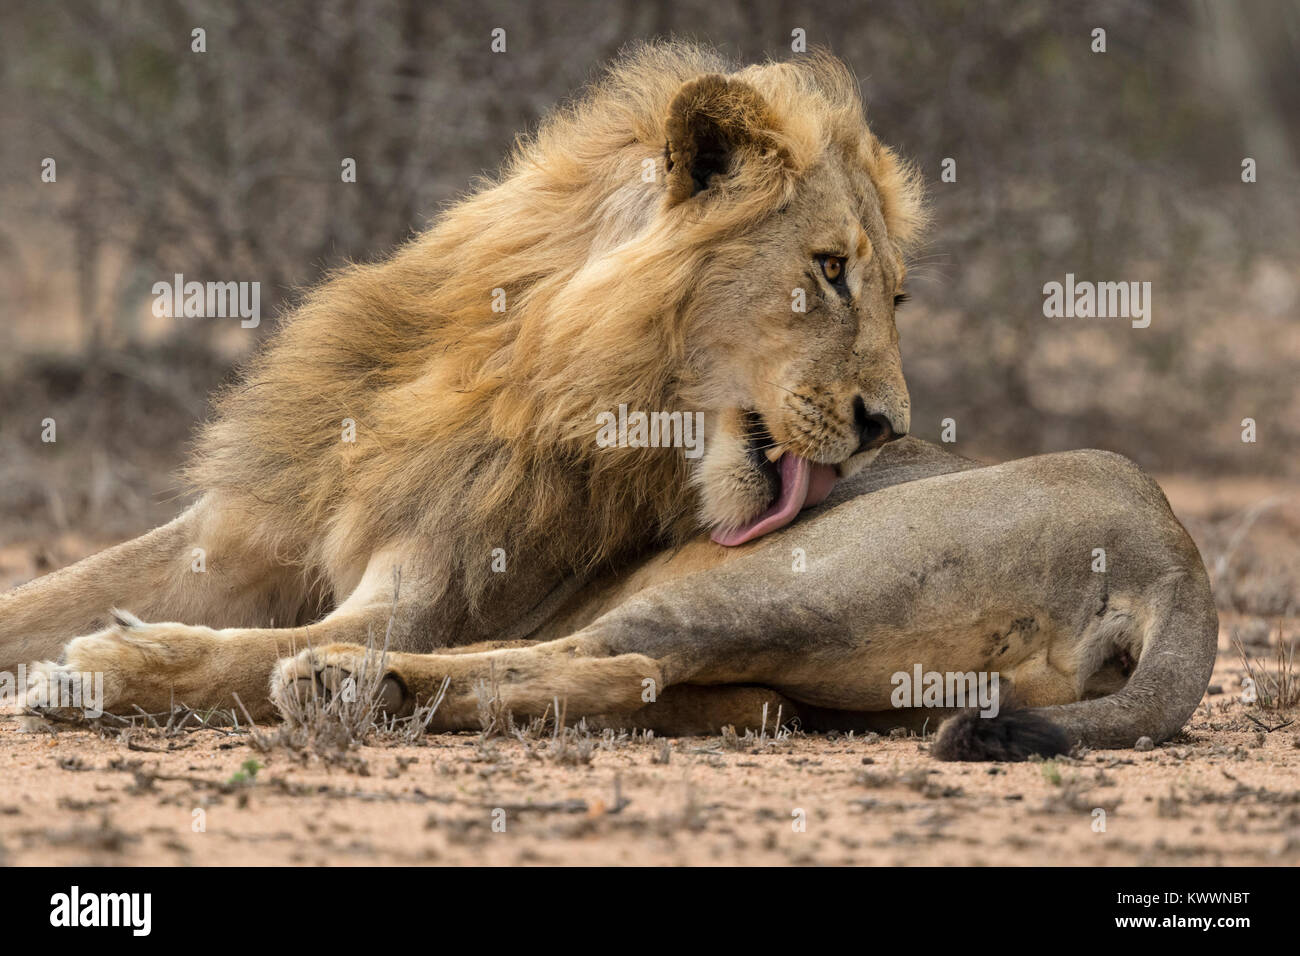 Young male Lion (Panthera leo) lying on the ground. Licking itself with its tongue Stock Photo